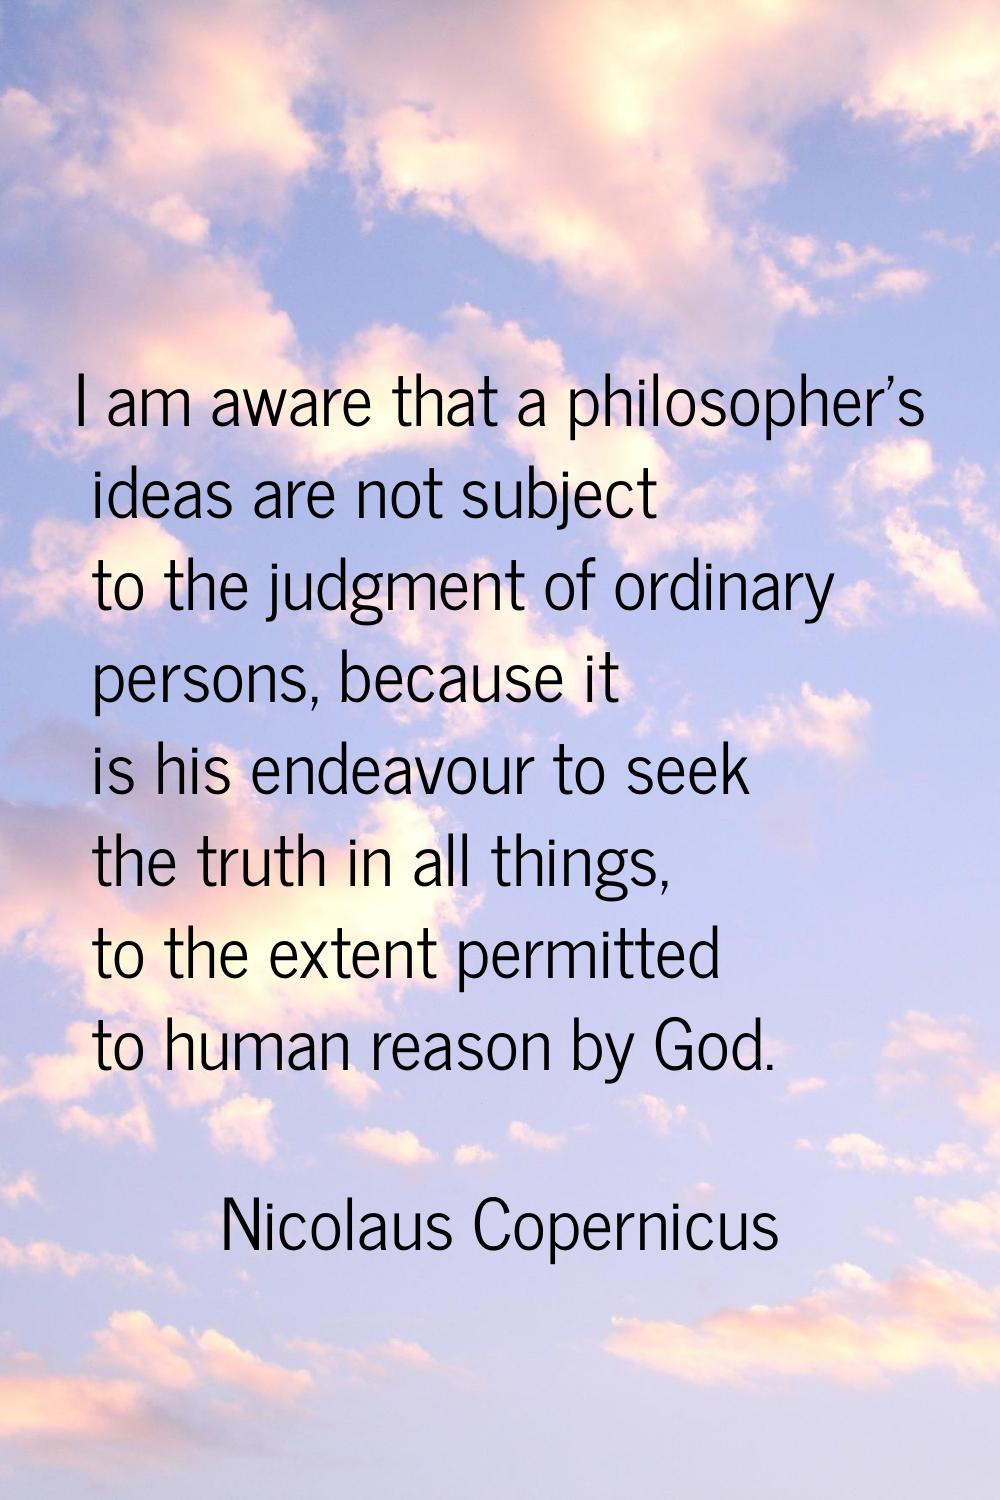 I am aware that a philosopher's ideas are not subject to the judgment of ordinary persons, because 